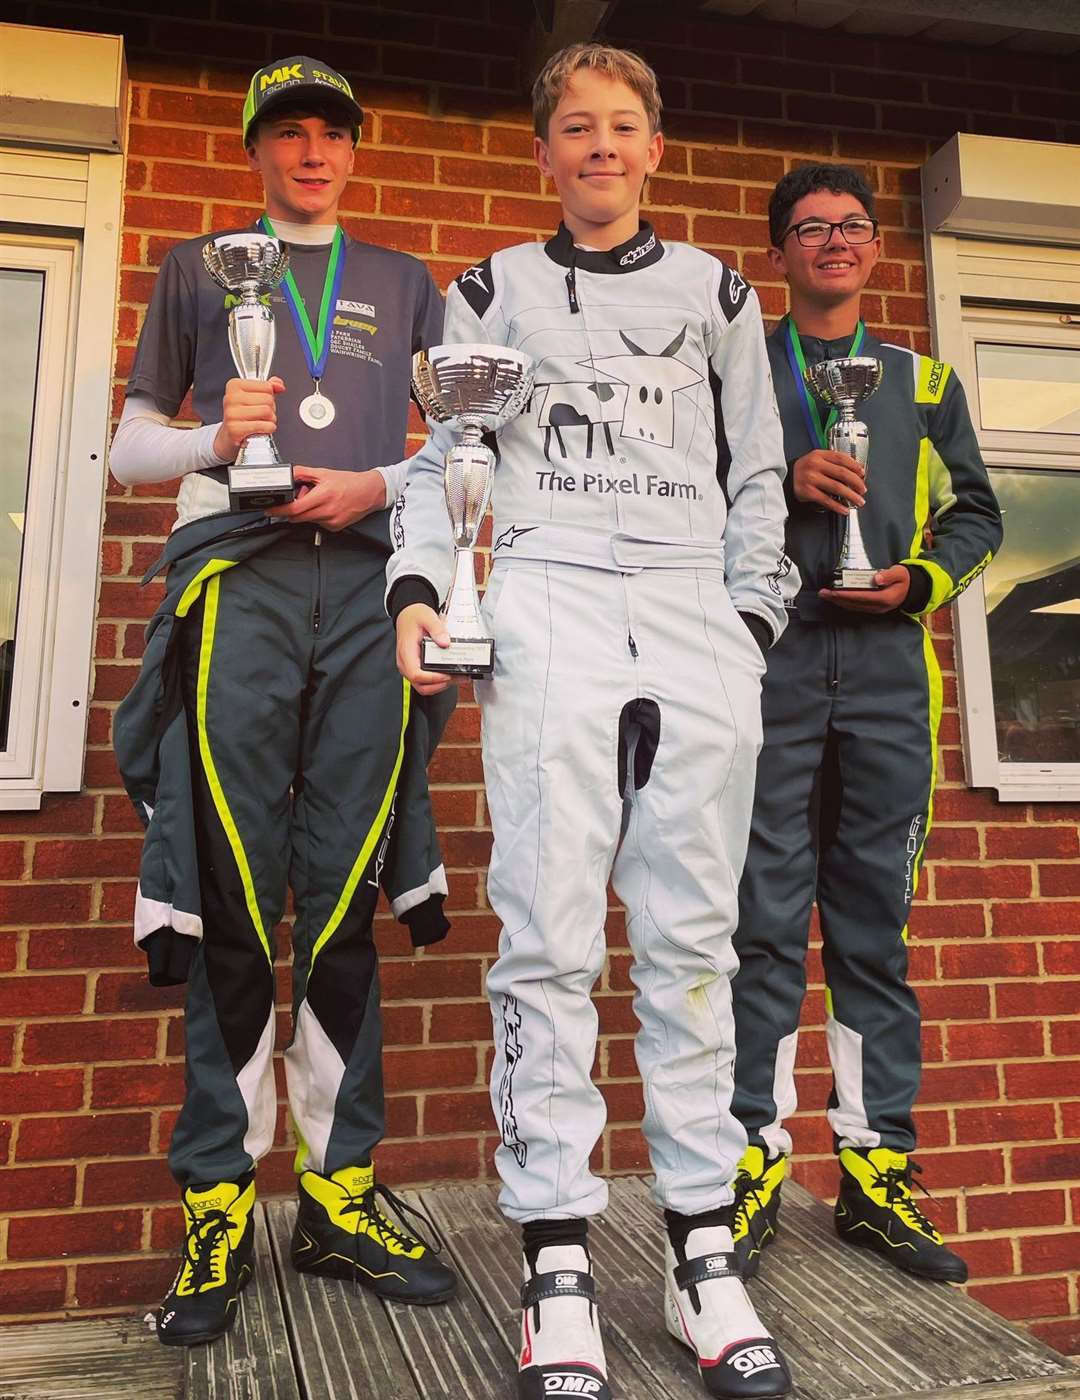 Marden racer William Sparrow made it to the top of the podium - twice - at Thruxton